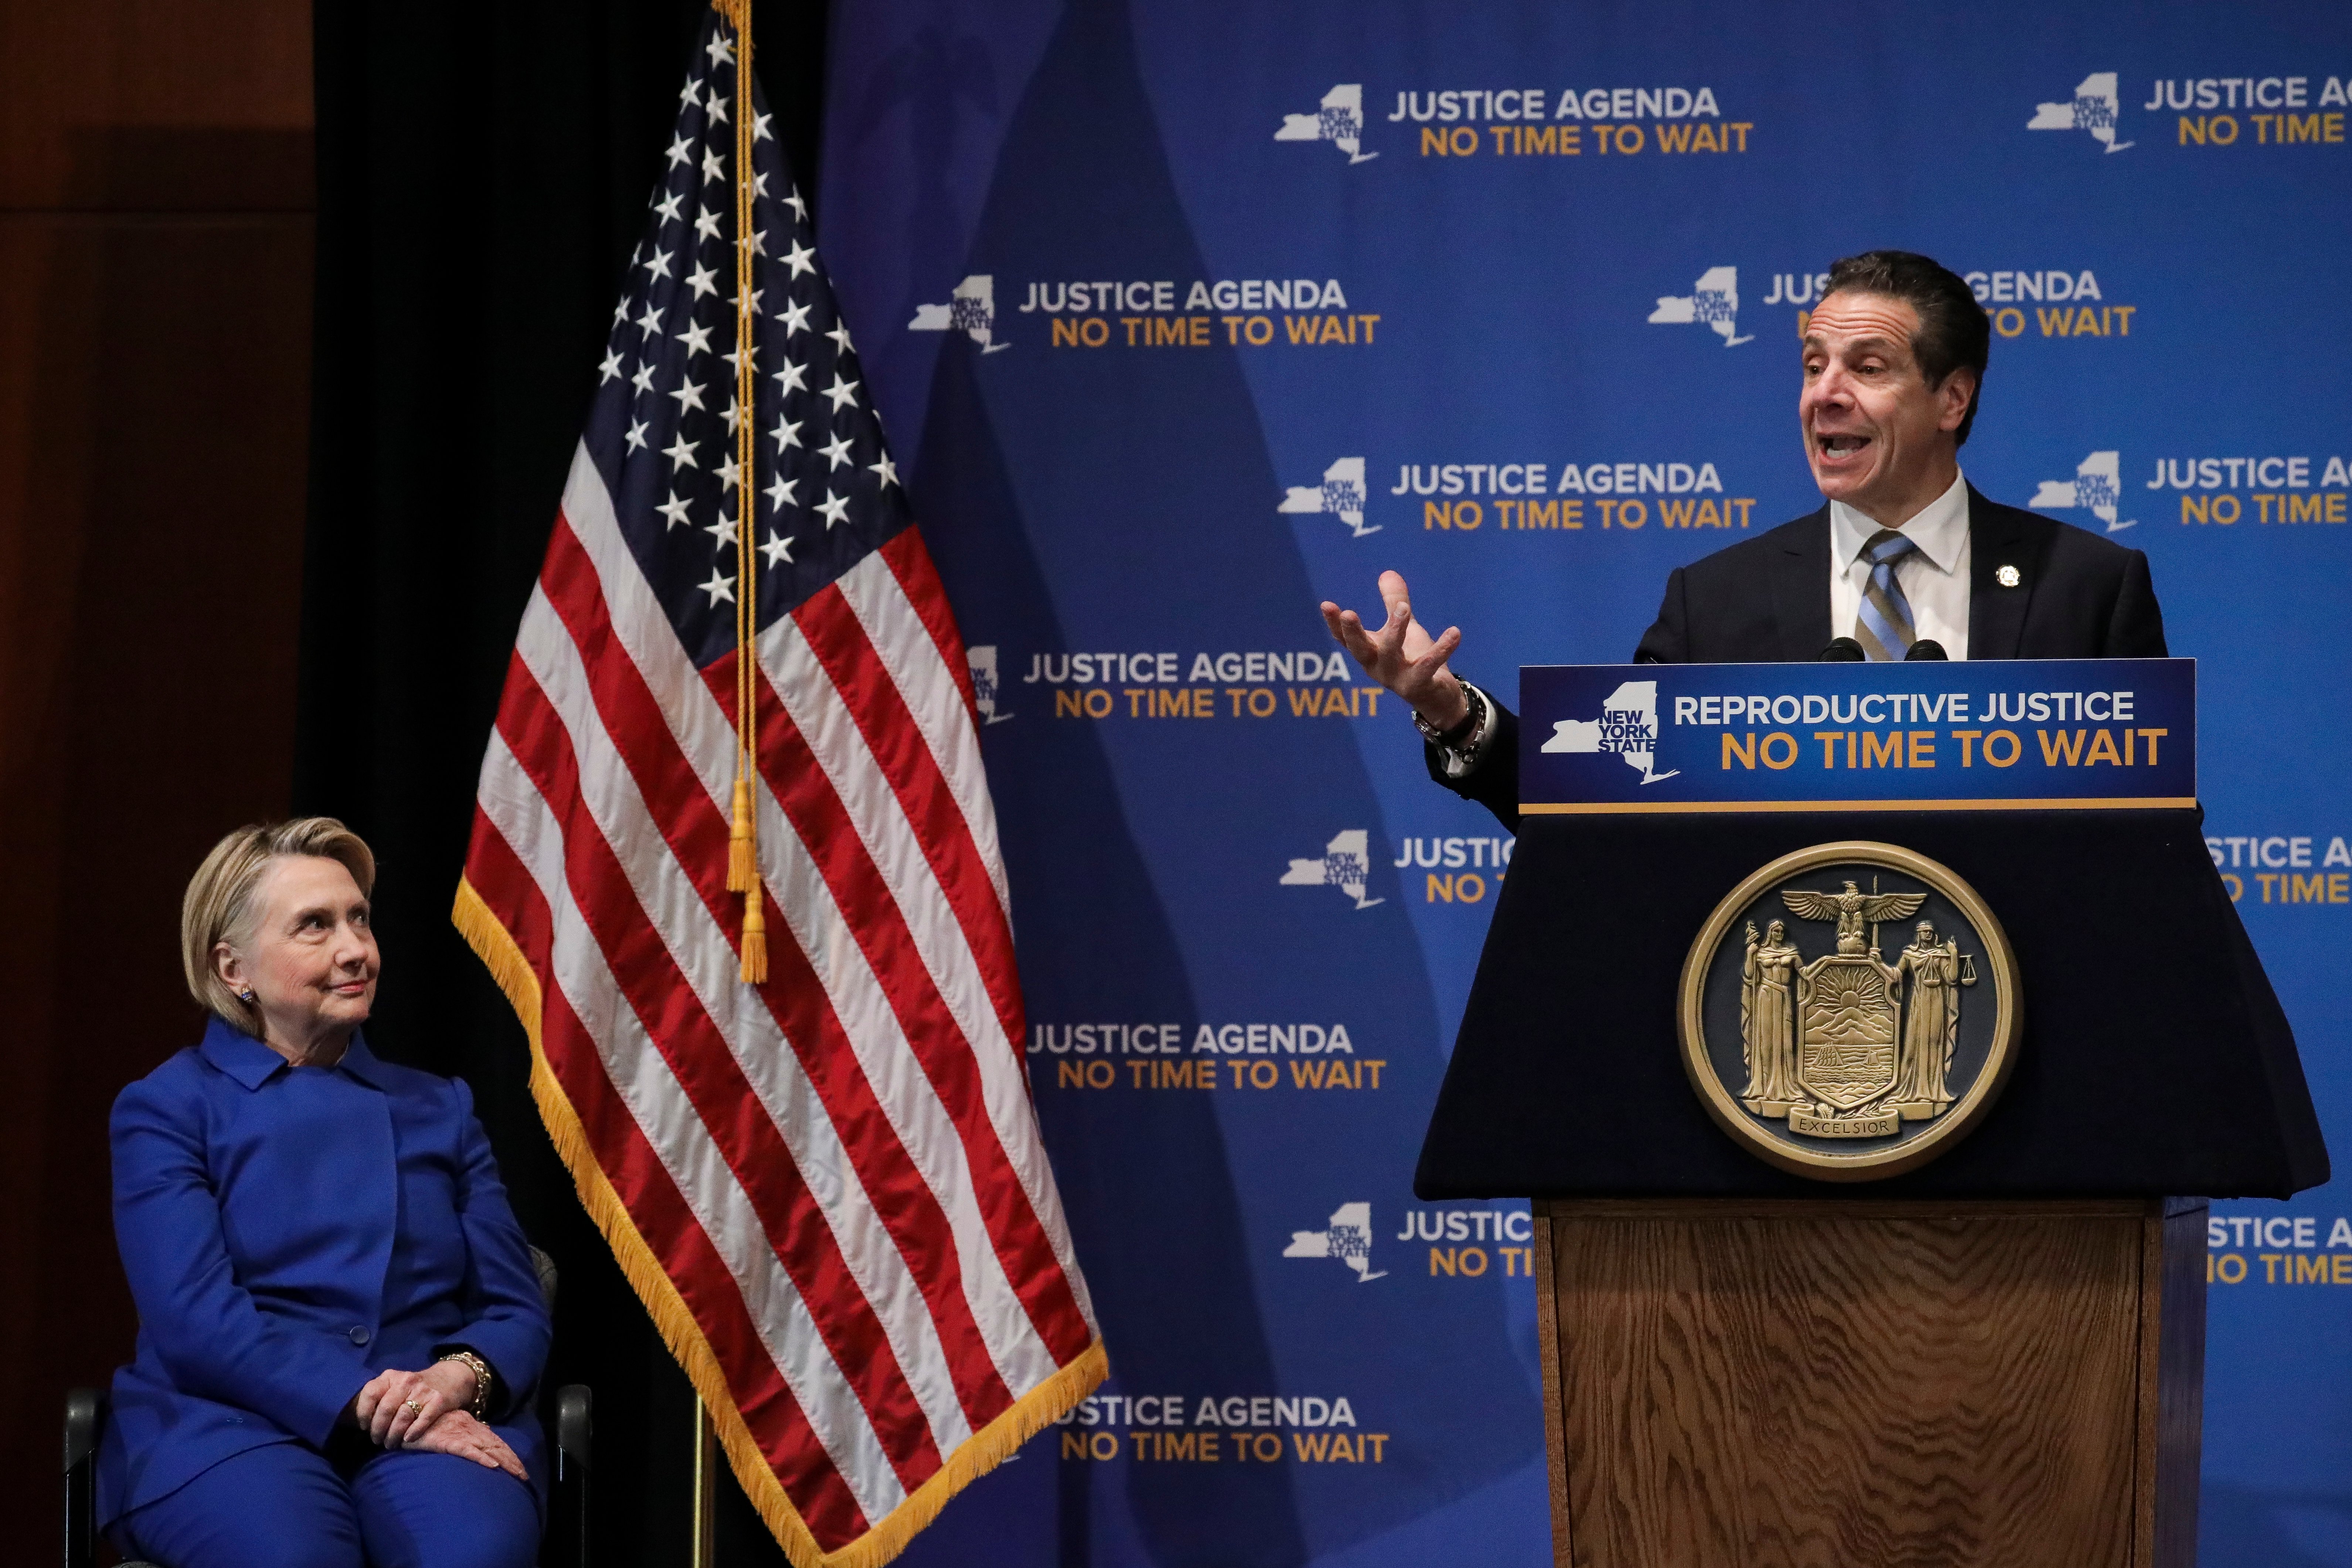 NEW YORK, NY - JANUARY 7: (L-R) Former Secretary of State Hillary Clinton looks on as New York Governor Andrew Cuomo speaks about reproductive rights at Barnard College, January 7, 2019 in New York City. (Photo by Drew Angerer/Getty Images)